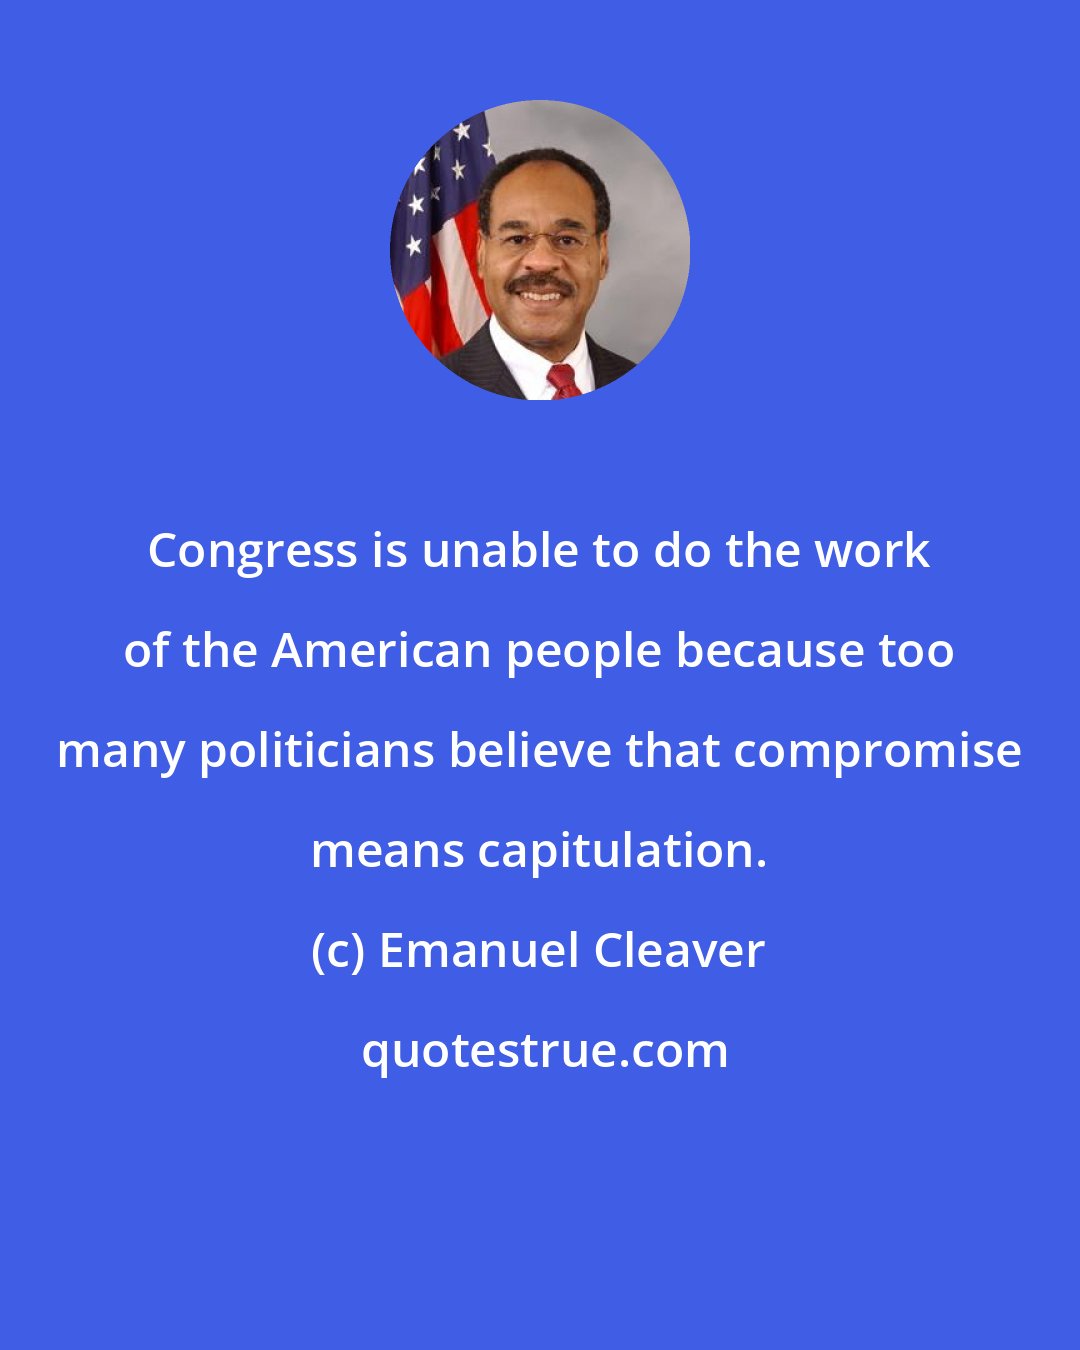 Emanuel Cleaver: Congress is unable to do the work of the American people because too many politicians believe that compromise means capitulation.